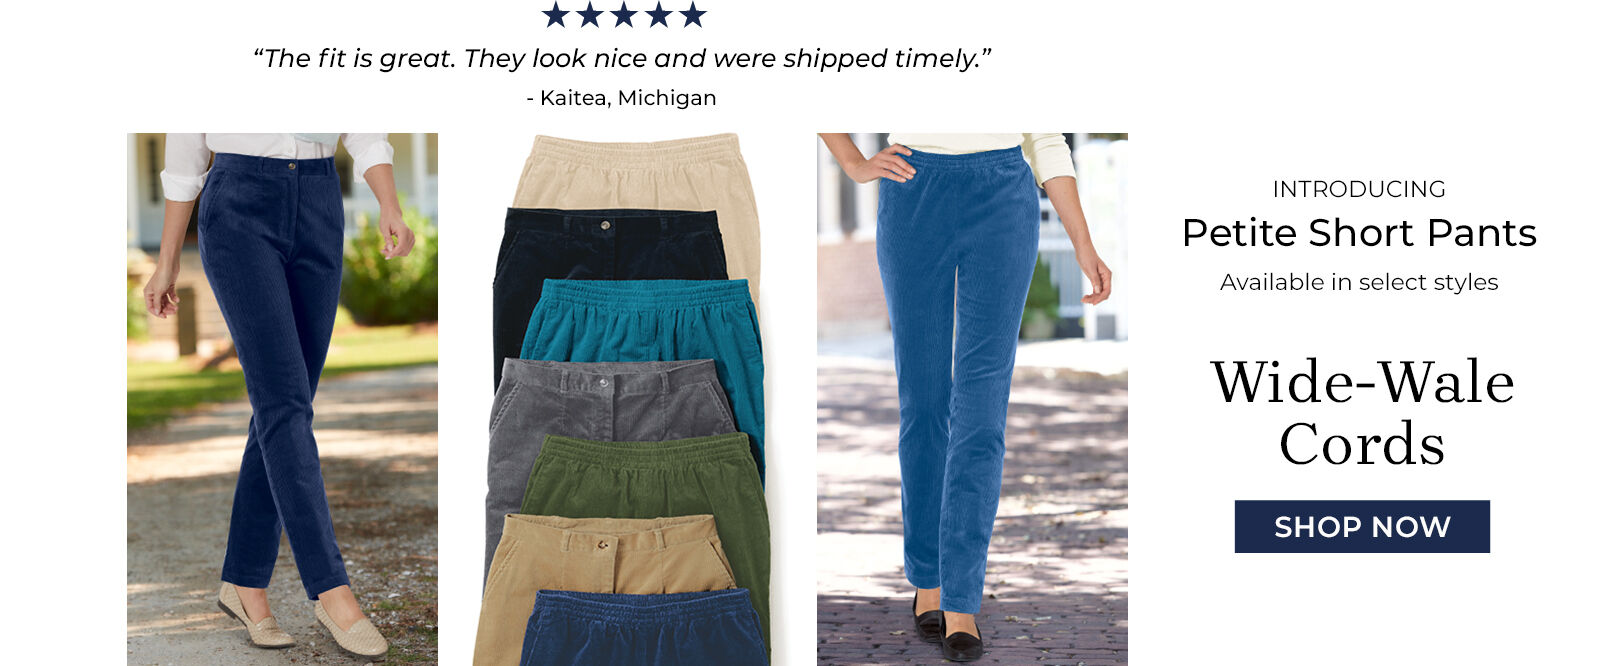 "The fir is great. They look nice and were shipped timely." -Kaitea, Michigan introducing petite short pants available in select styles wide-wale cords shop now